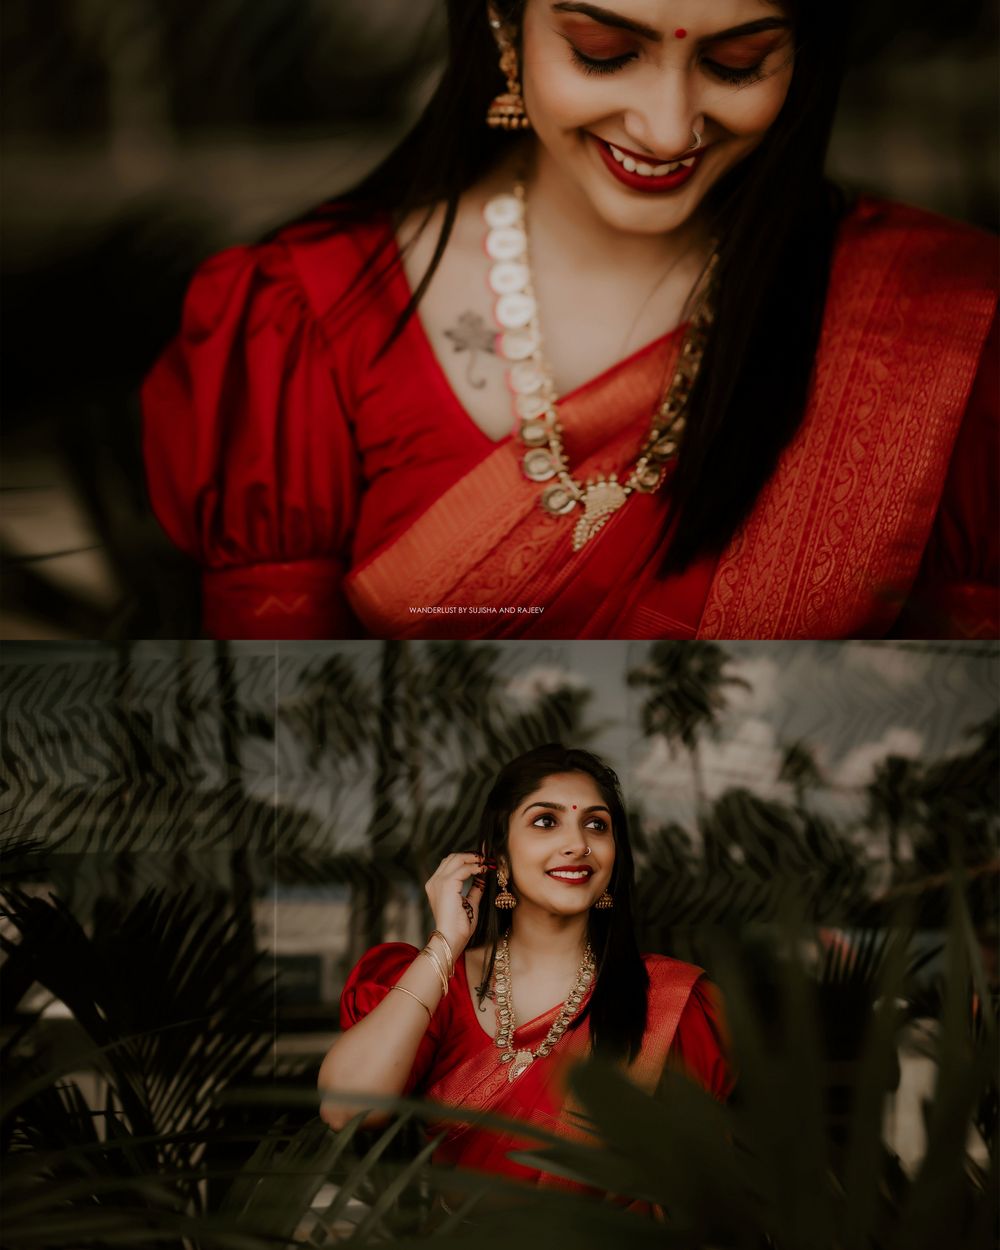 Photo From Engagement Ceremony - By Wanderlust by Sujisha and Rajeev